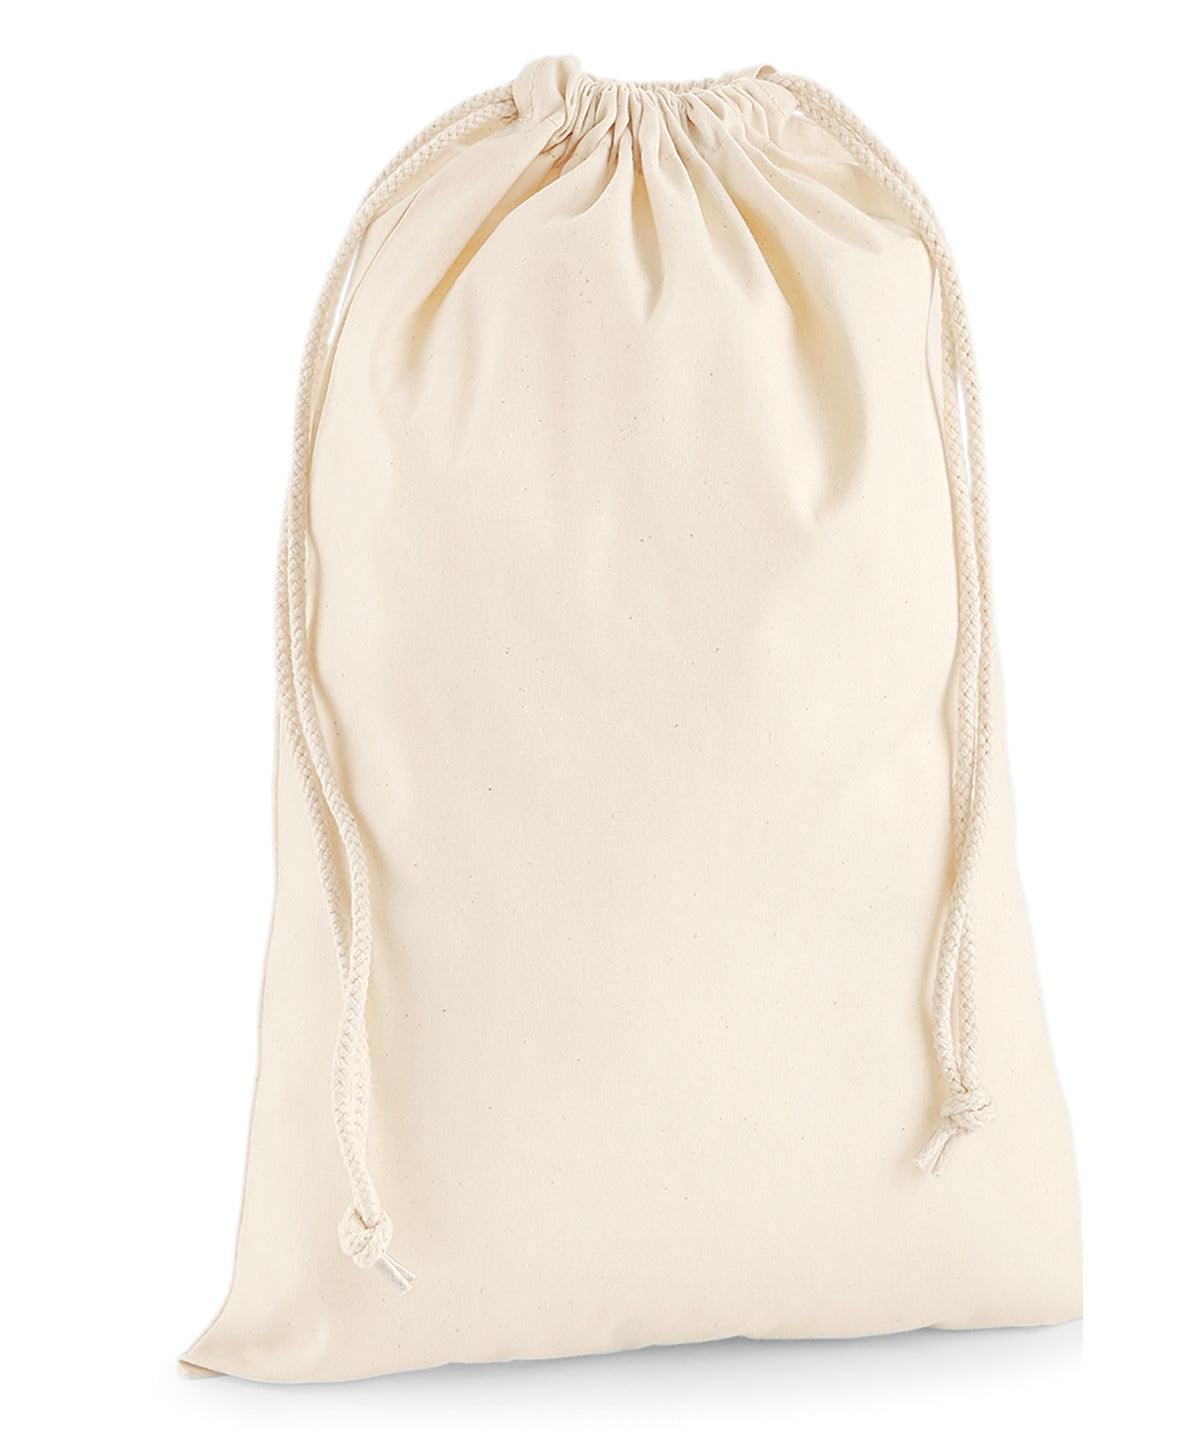 Natural - Premium cotton stuff bag Bags Westford Mill Bags & Luggage, Must Haves Schoolwear Centres